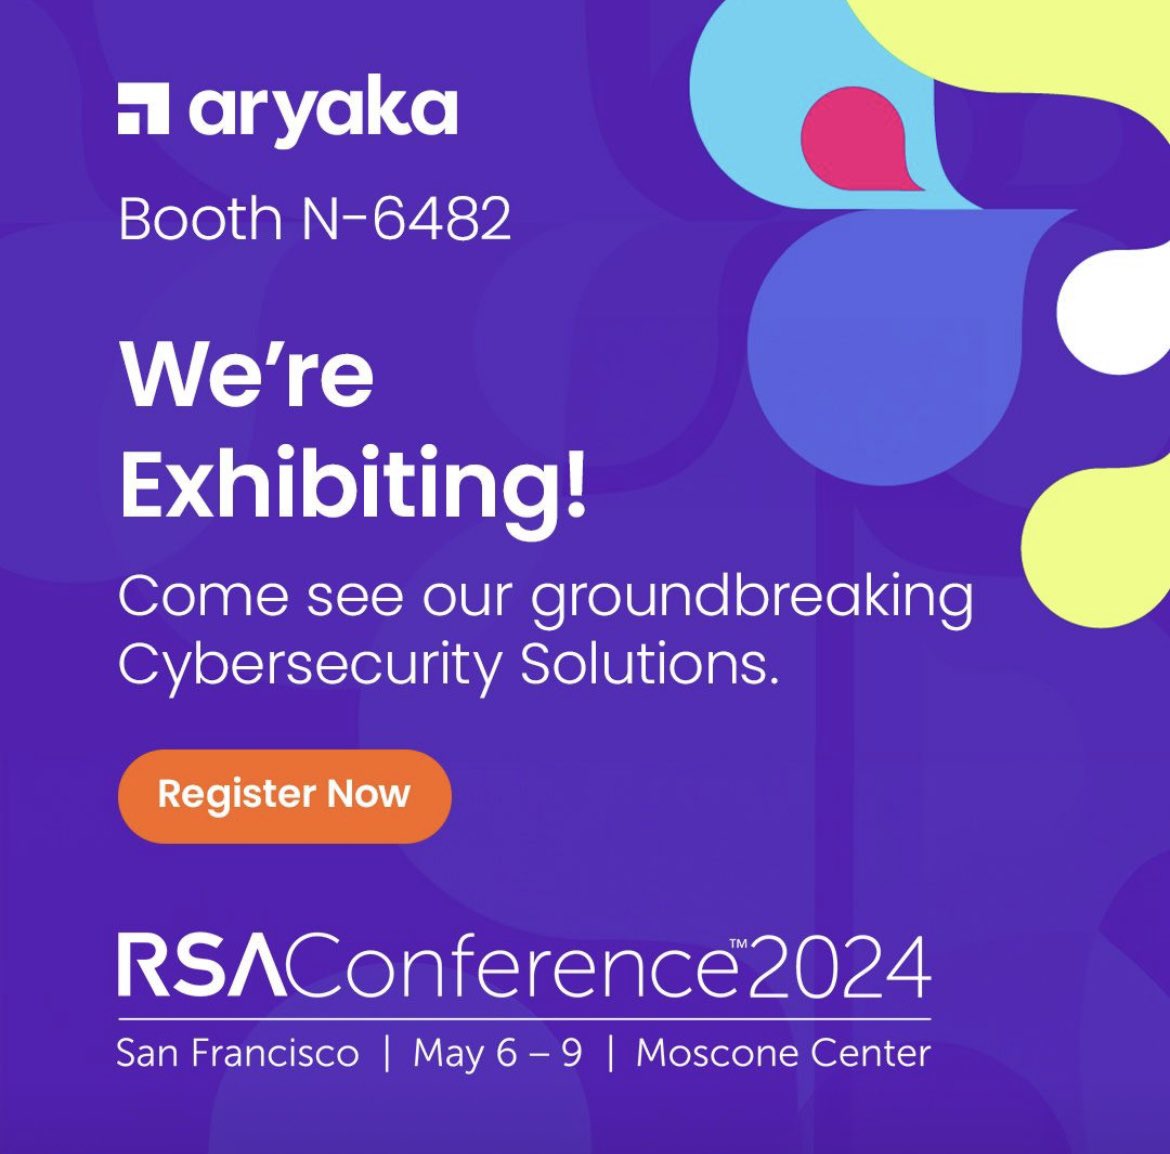 Join us at #RSAC next week in San Francisco at booth 6482 in the North Expo Hall for some - quite literally - Unified SASE as a Service magic. On Wednesday May 8 late afternoon come by our booth for some refreshment as part of the RSA Expo Pub Crawl.